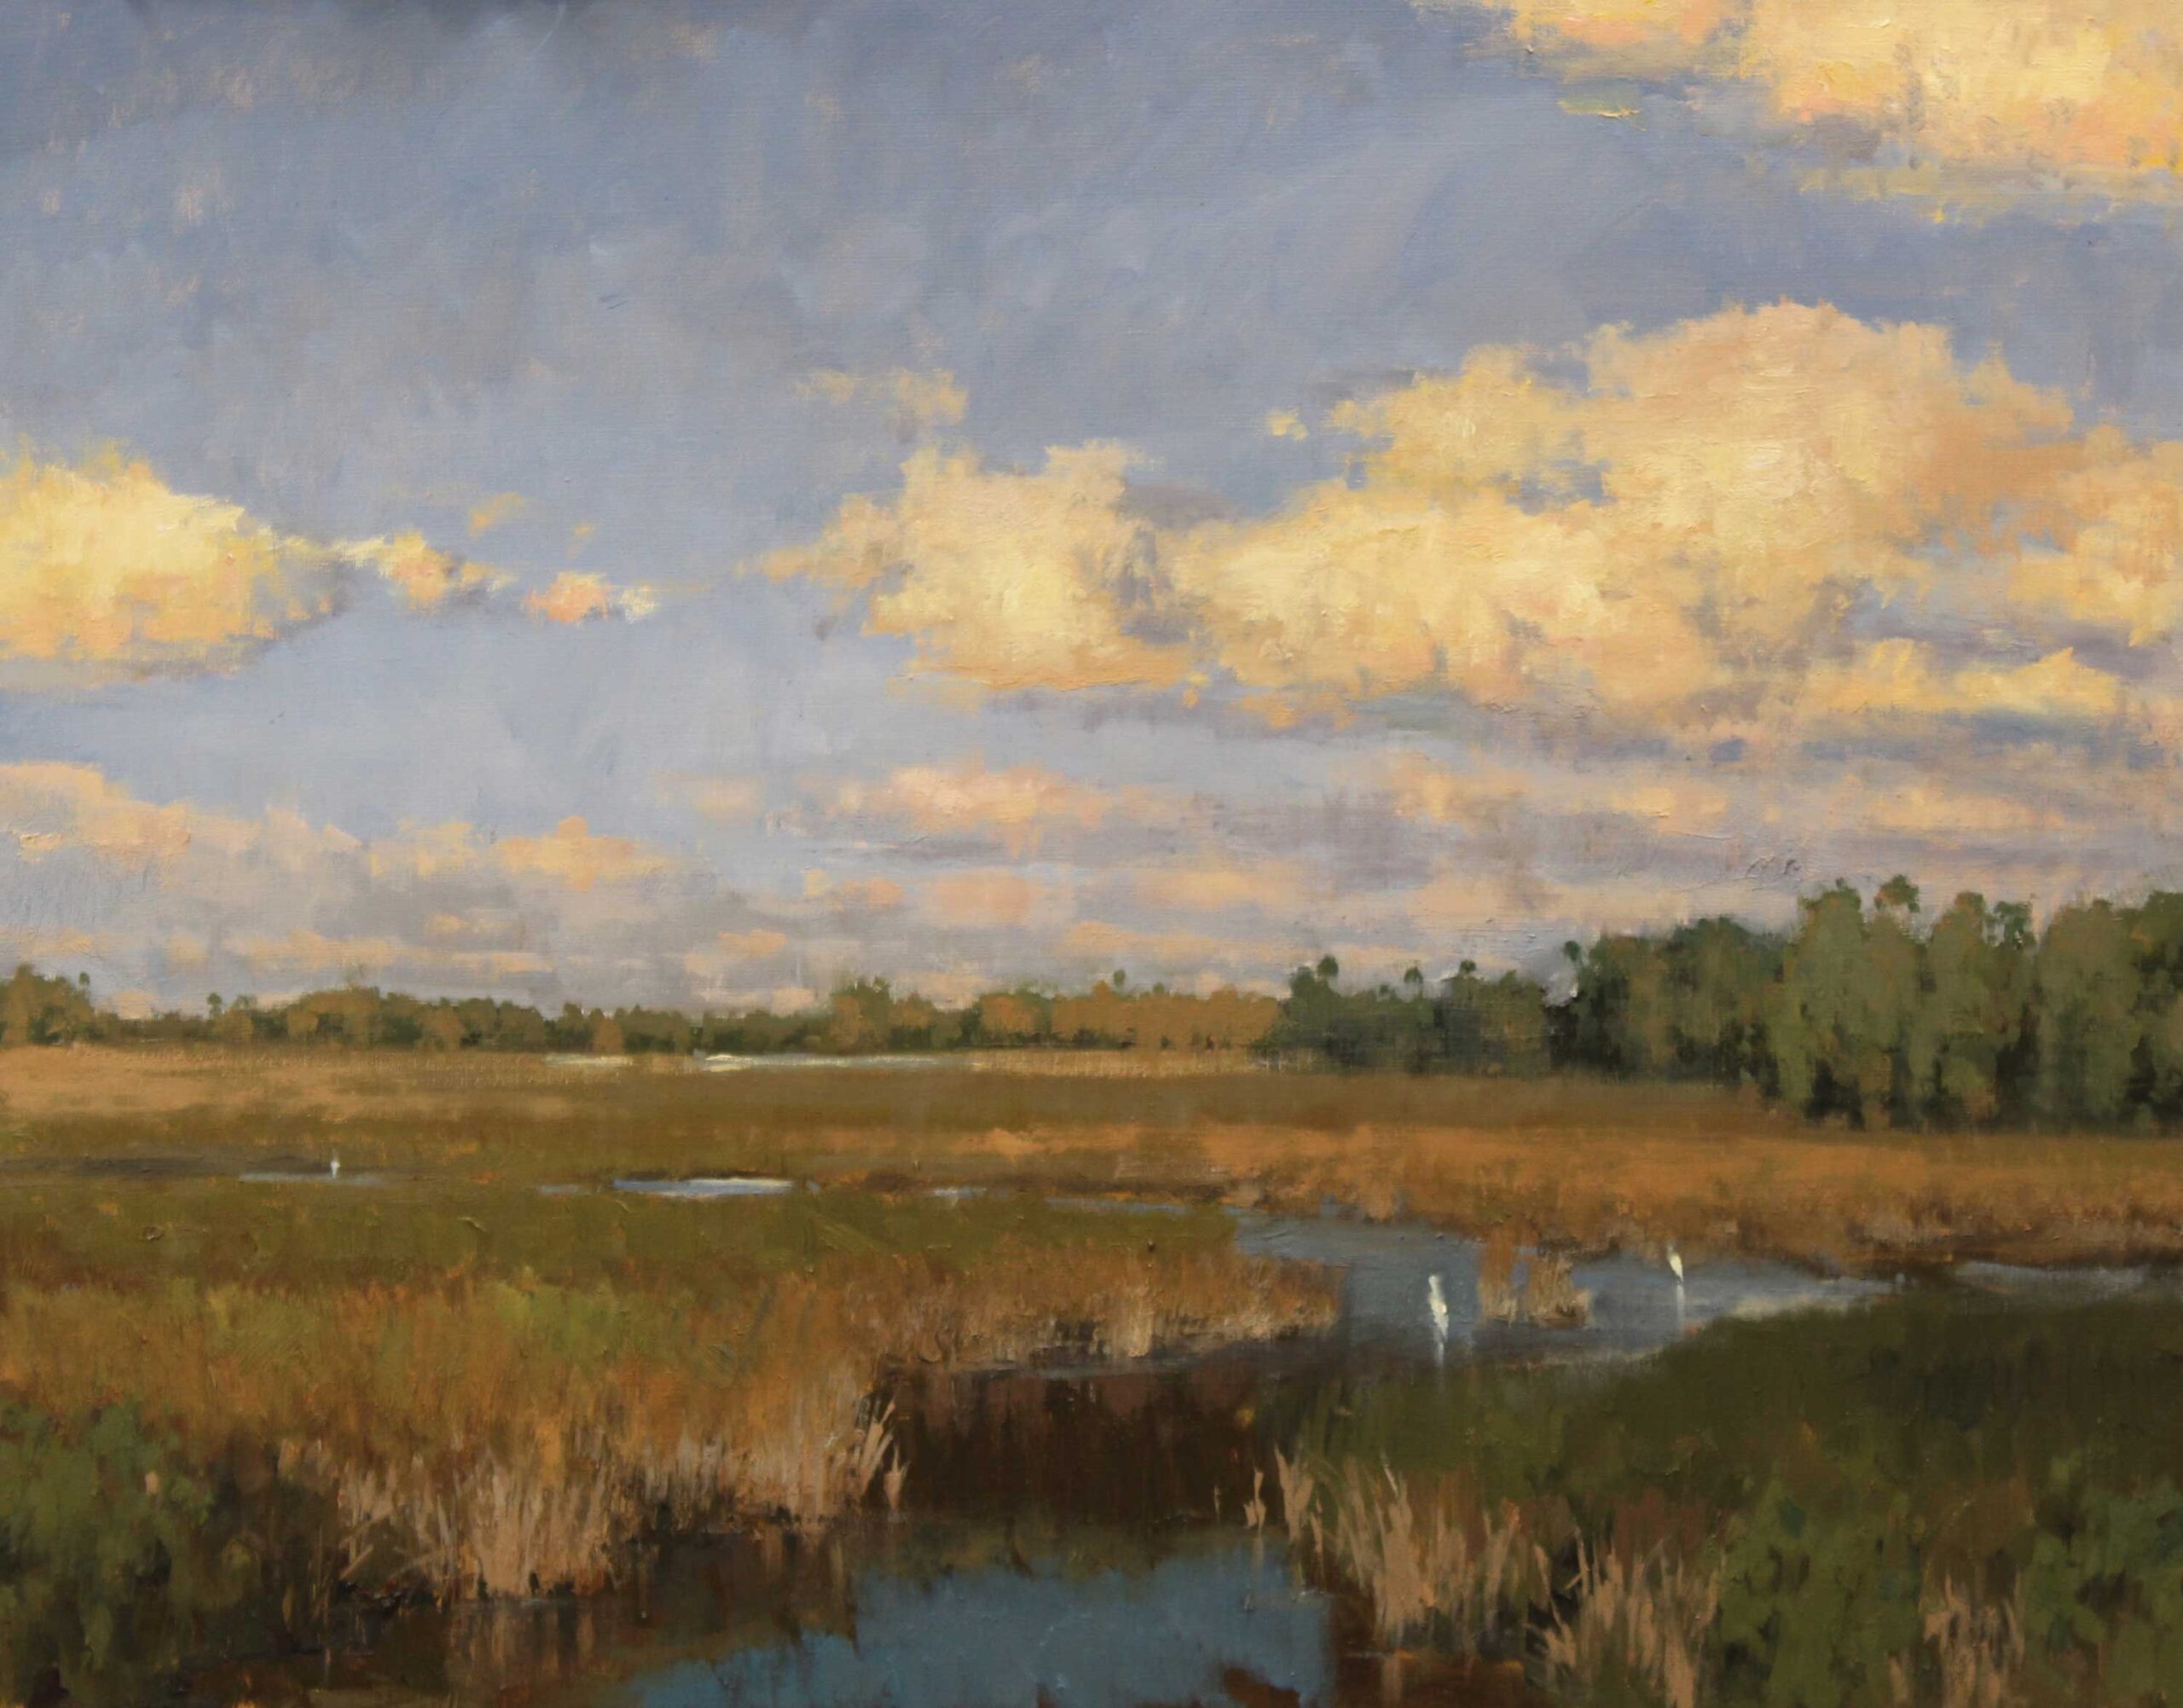 Roger Dale Brown, "Color of Summer," 2020, oil on linen, 24 x 30 in., collection of the artist